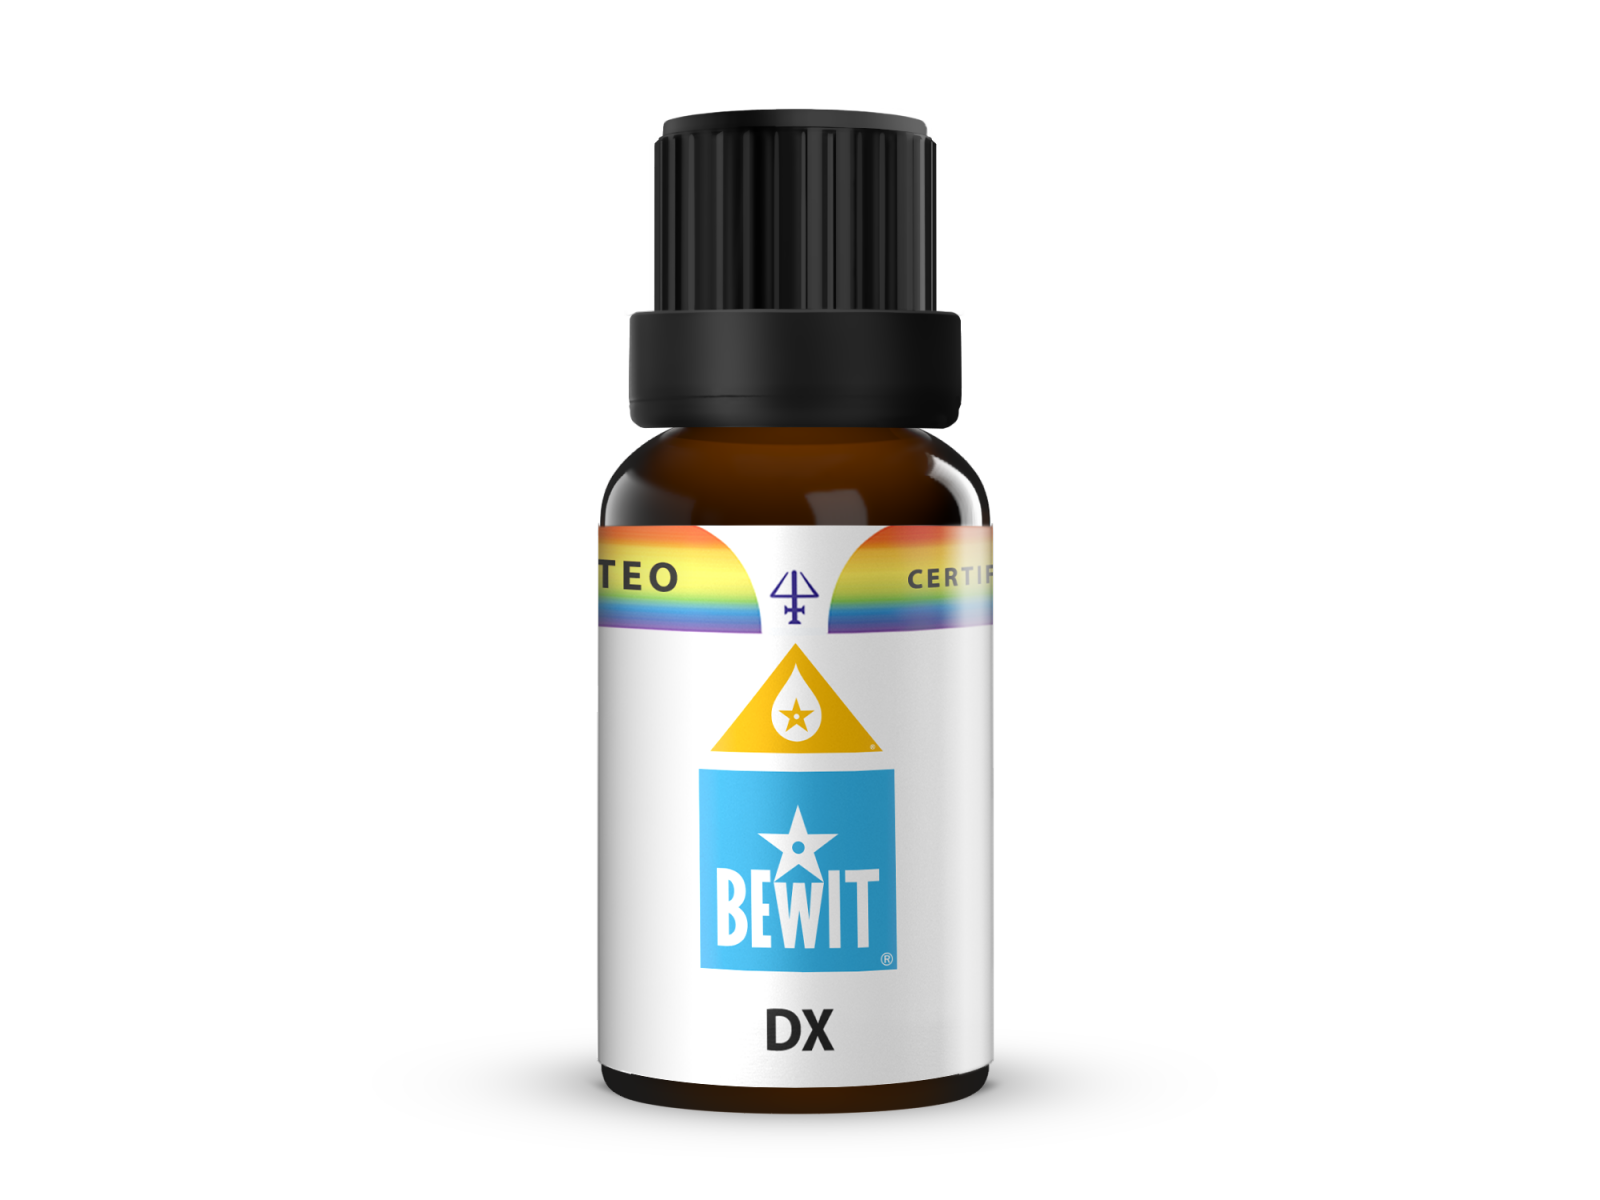 BEWIT DX - 100% pure and natural blend of CTEO® essential oils - 1